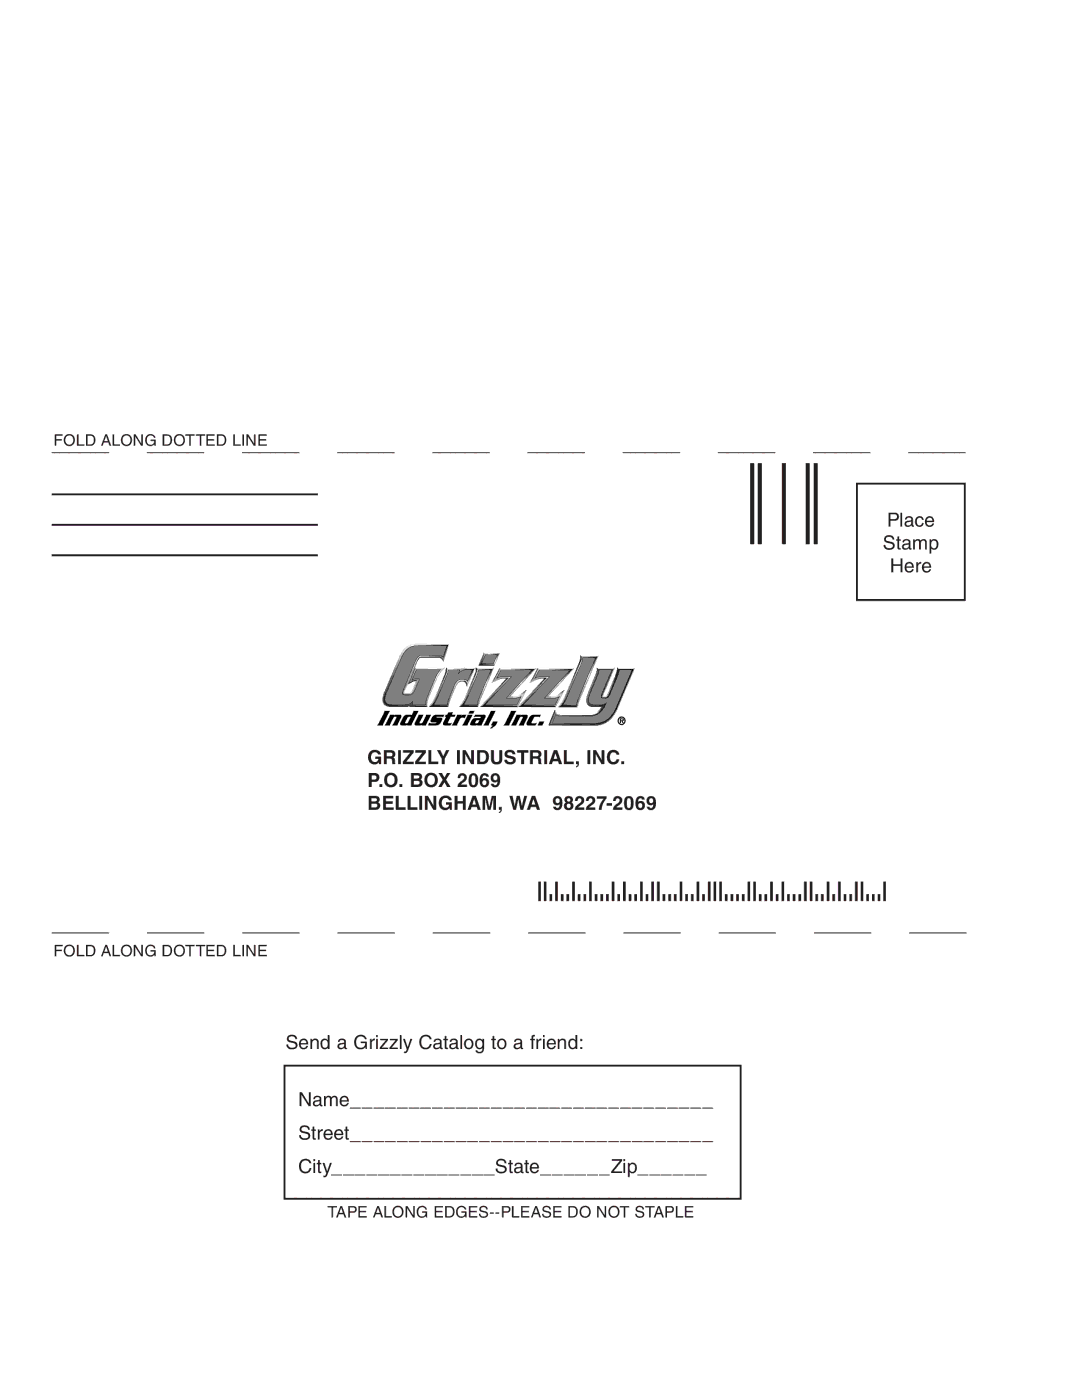 Grizzly H3140 owner manual Grizzly INDUSTRIAL, INC, Box Bellingham, Wa 